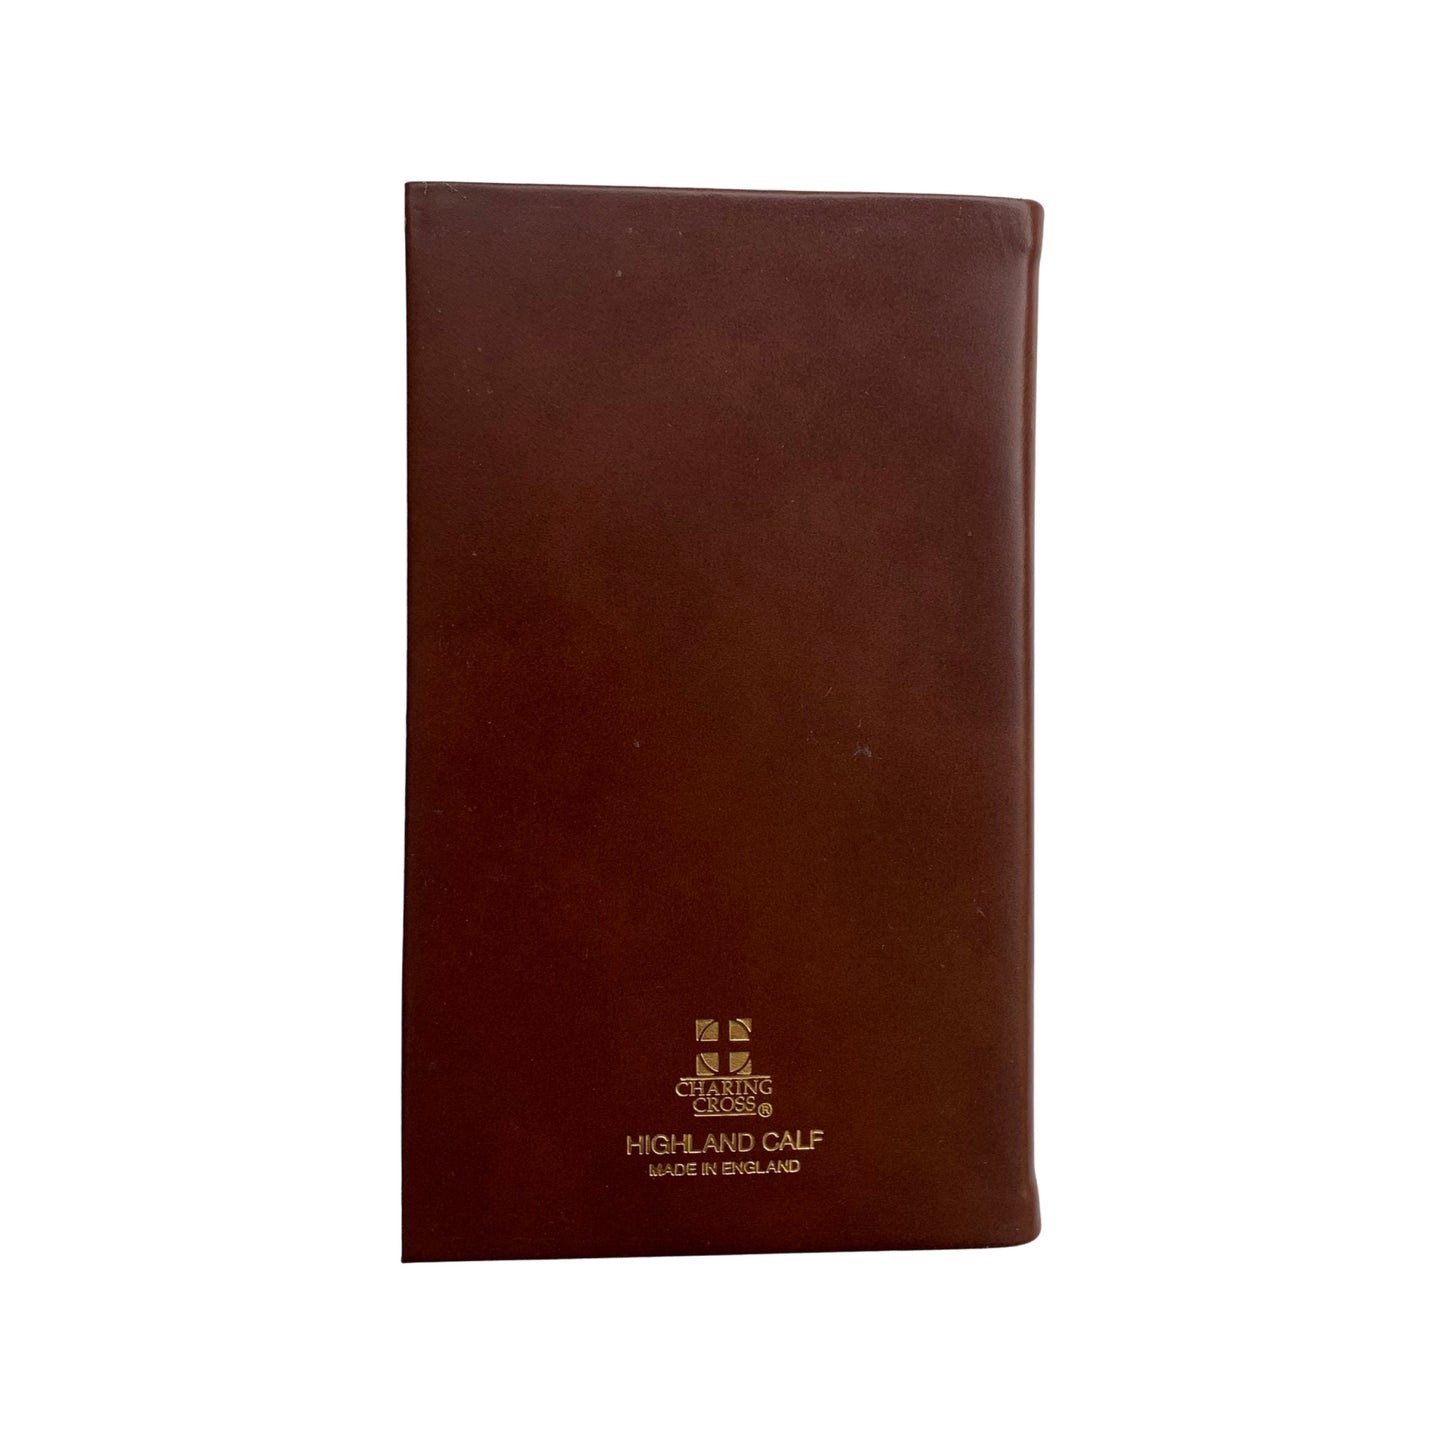 YEAR 2023 CALF Leather Pocket Agenda Book | 4 by 2.5" | D742C